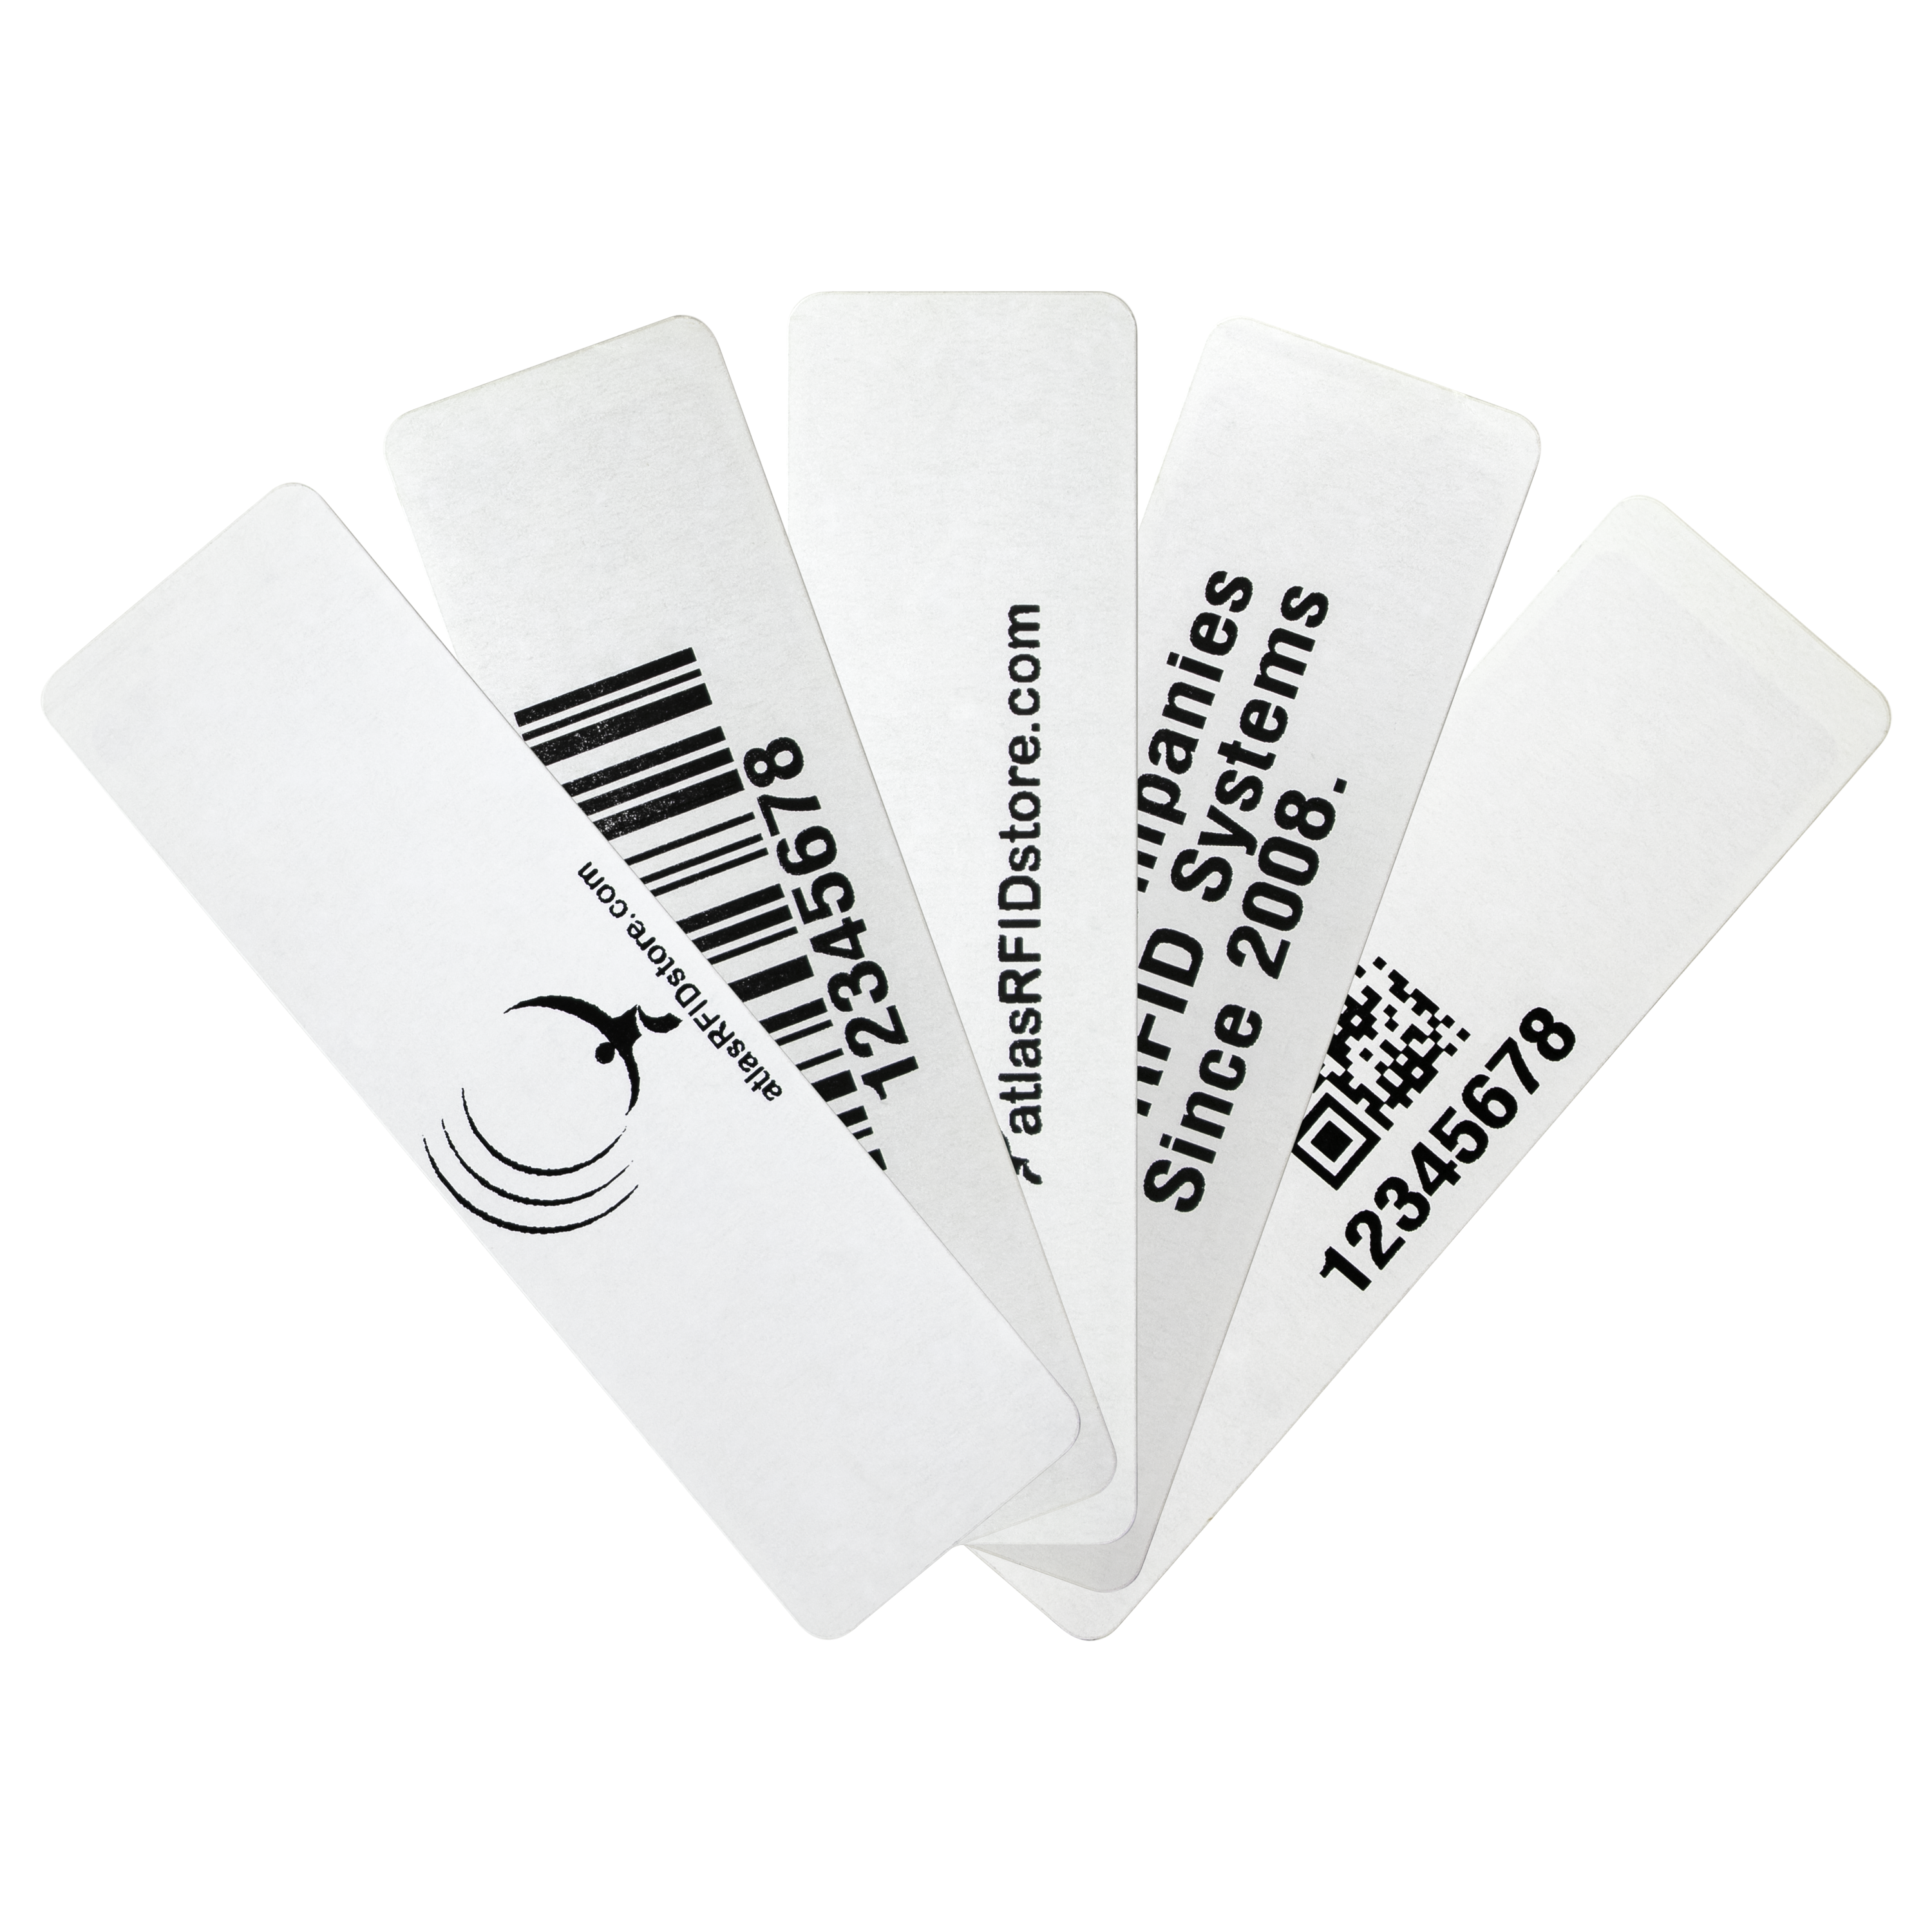 rfid-encoding-printing-what-can-you-put-on-rfid-tags-atlasrfidstore